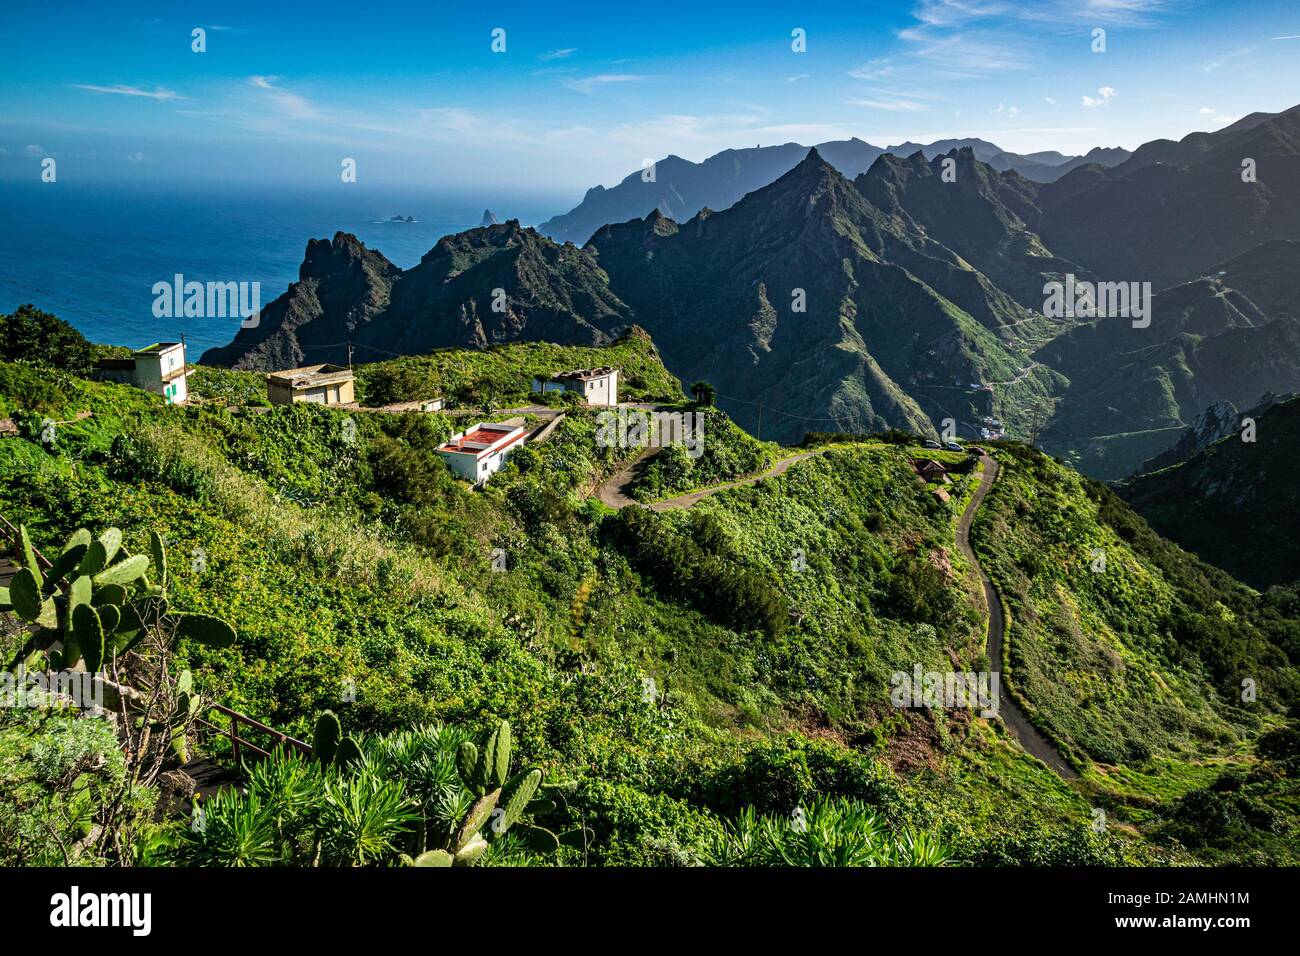 Picturesque coastline landscape of Anaga Rural Park, Northern Tenerife with green steep hills, and rough cliffs. Stock Photo